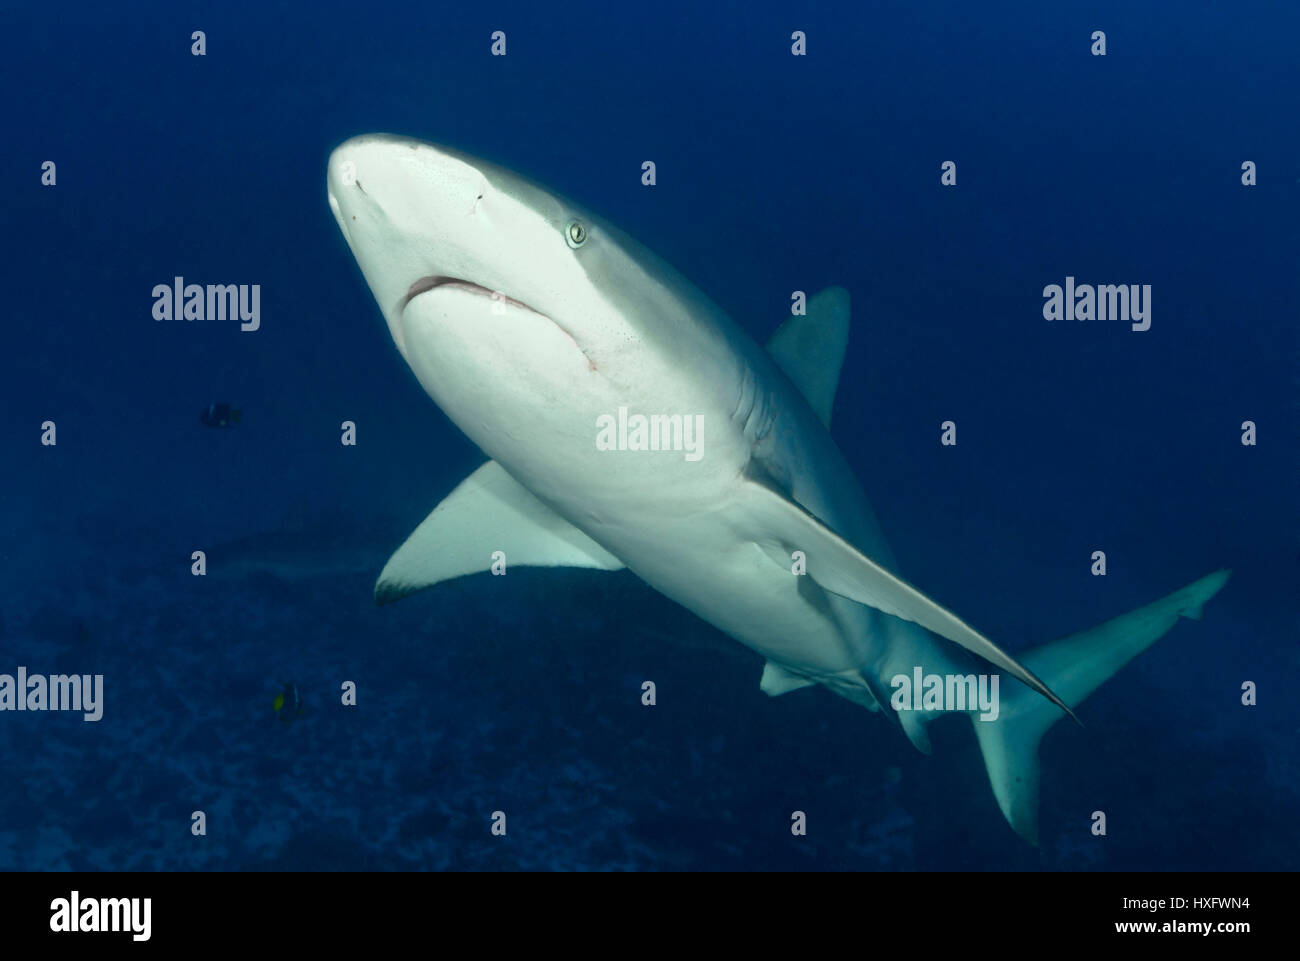 Galapagosshark (Carcharhinus galapagensis) Banque D'Images